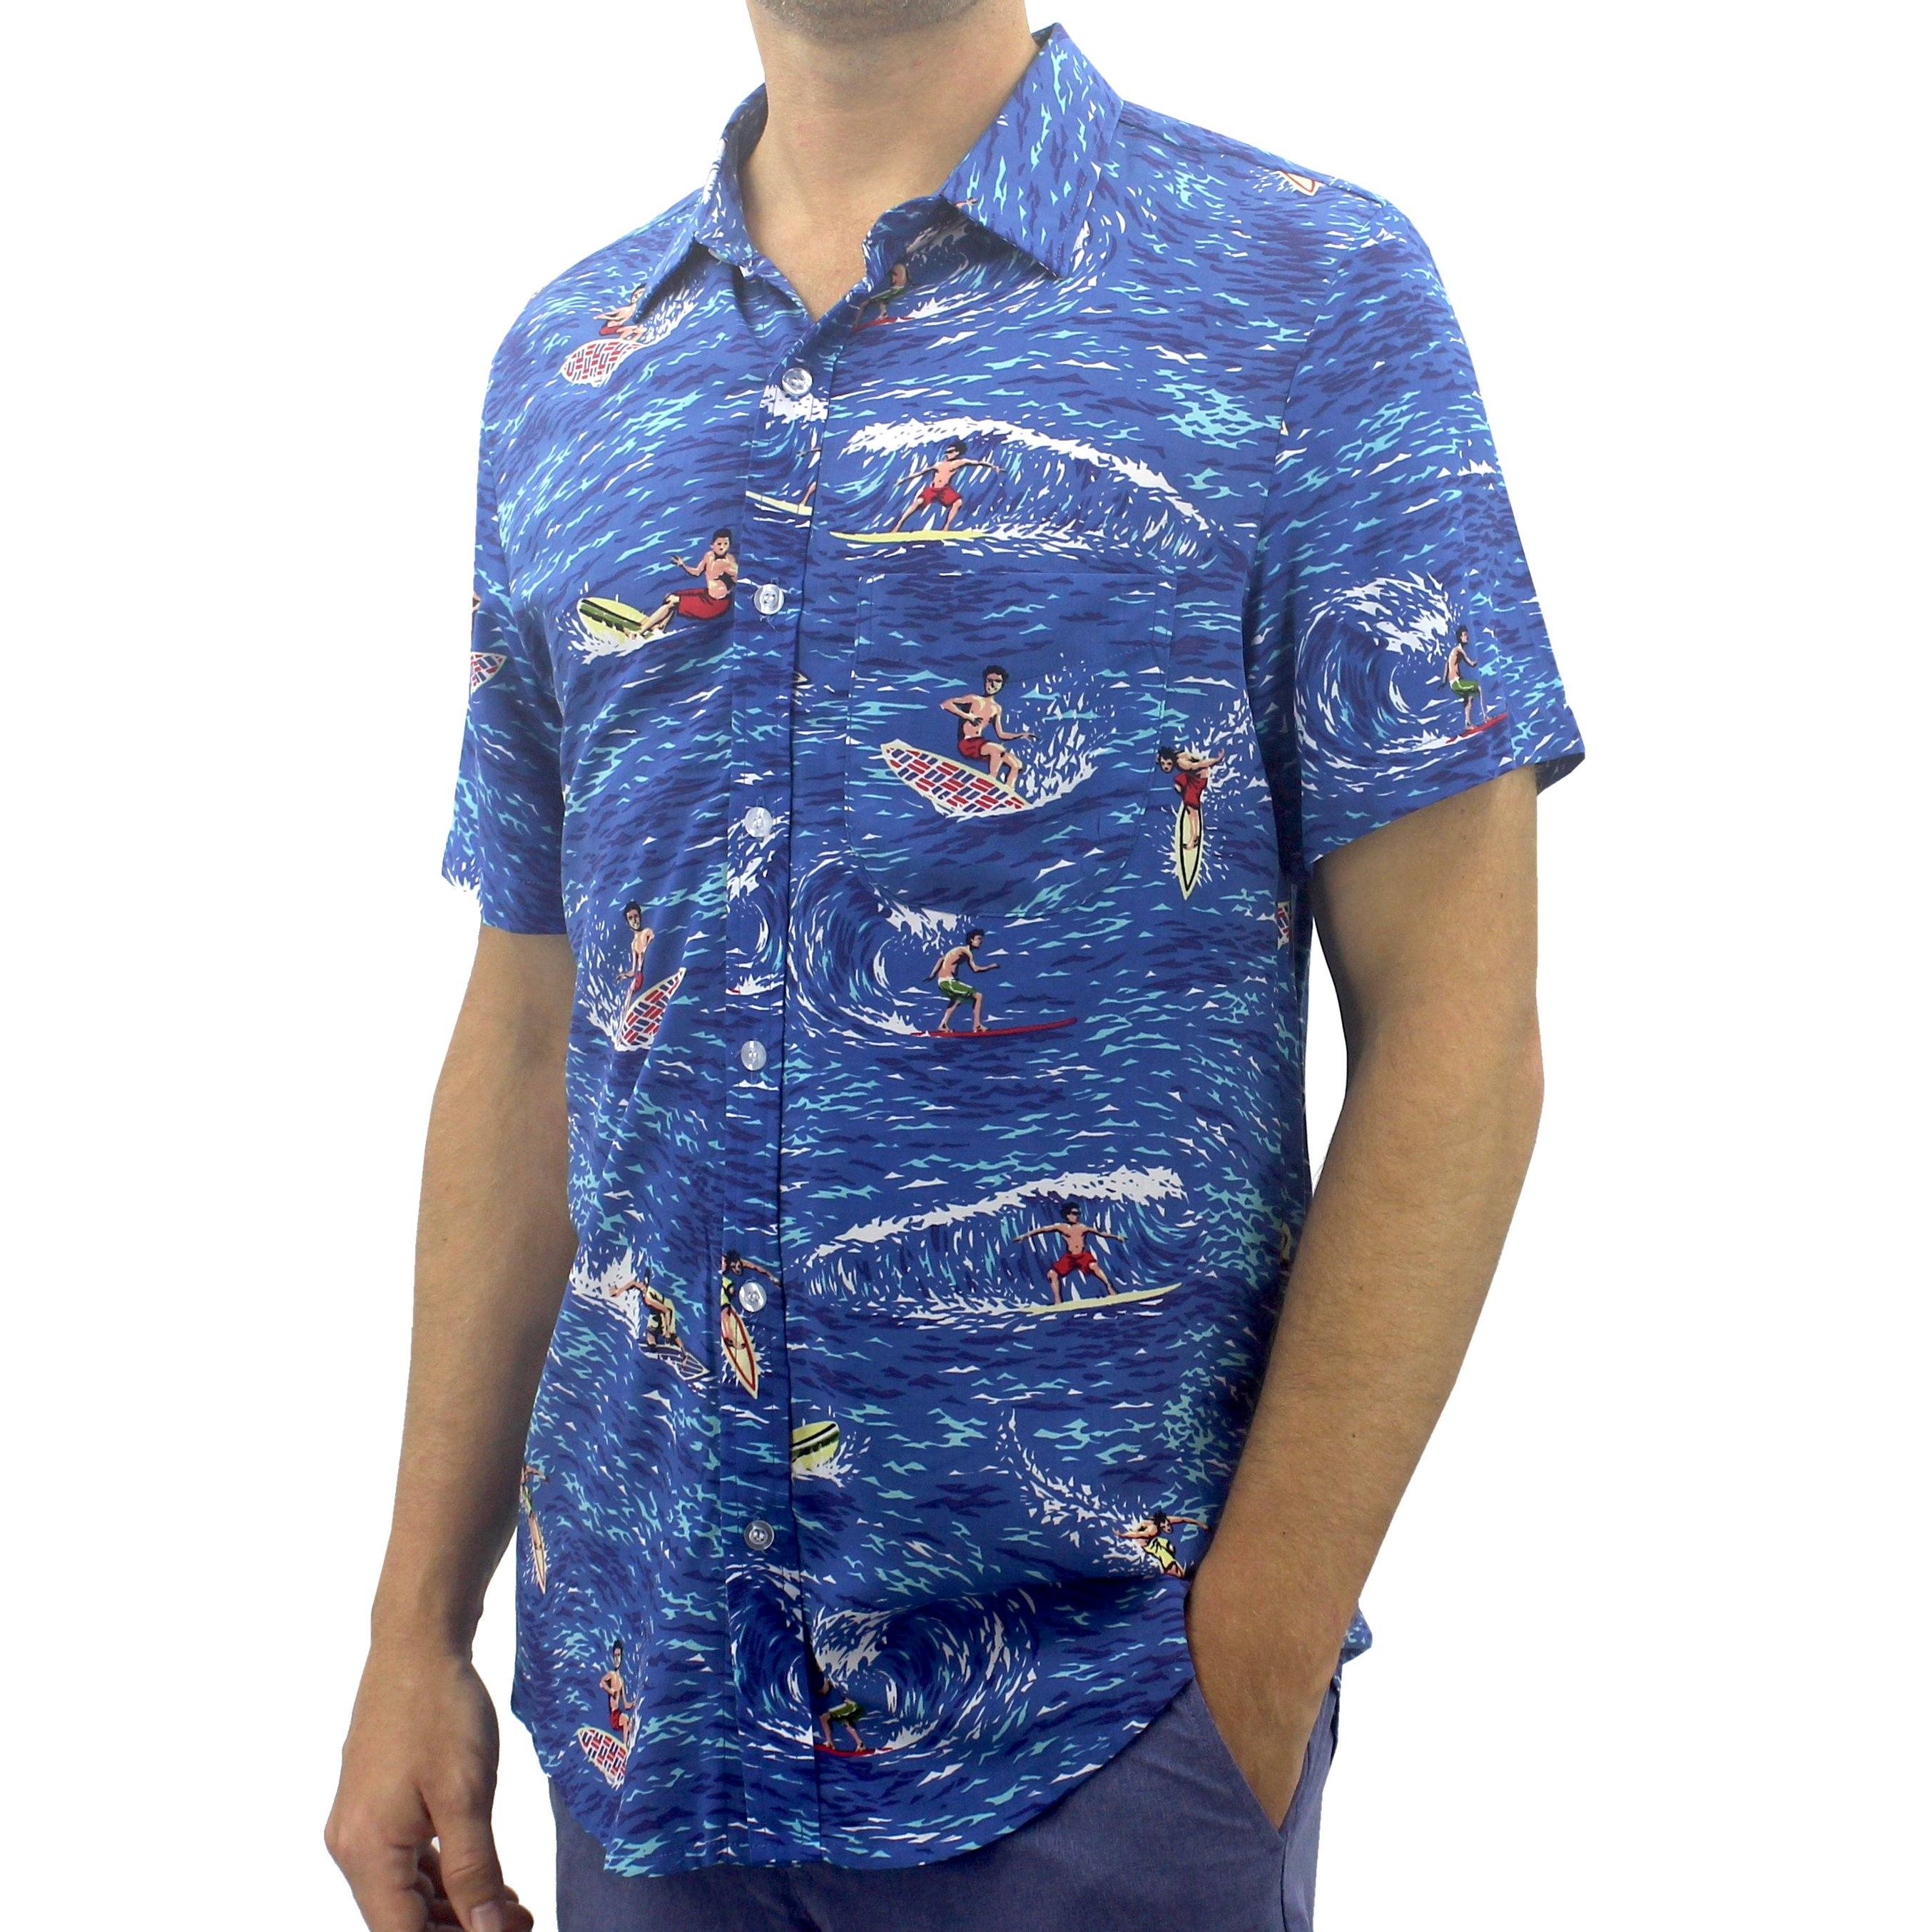 Rock Atoll Men's Casual Summer Hawaiian Shirt for Surfers with Surfing Surfboard Print